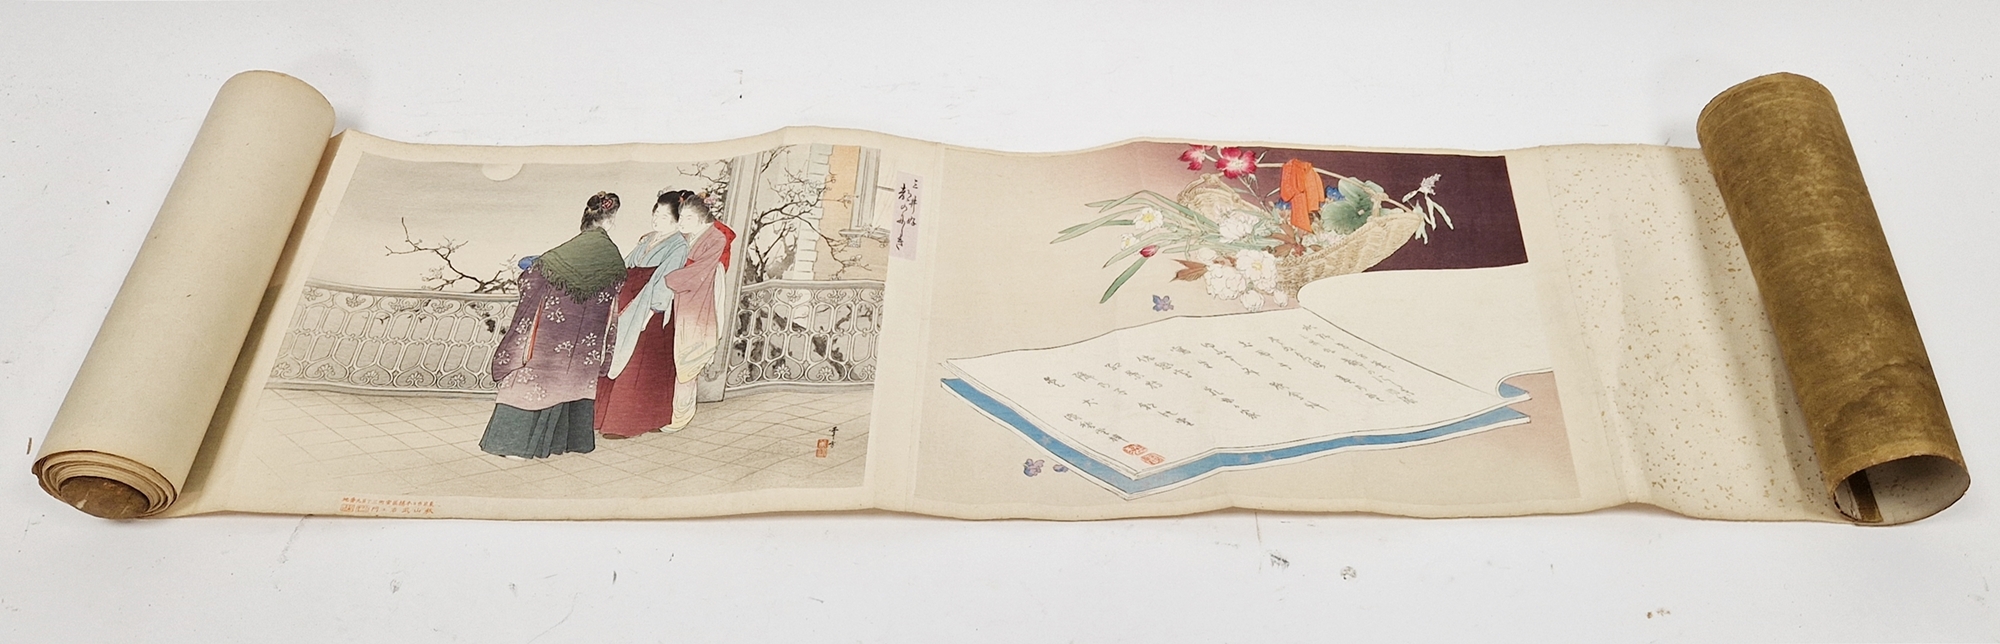 Japanese printed scroll, "The Seasons and their Fashions", specially printed on the original designs